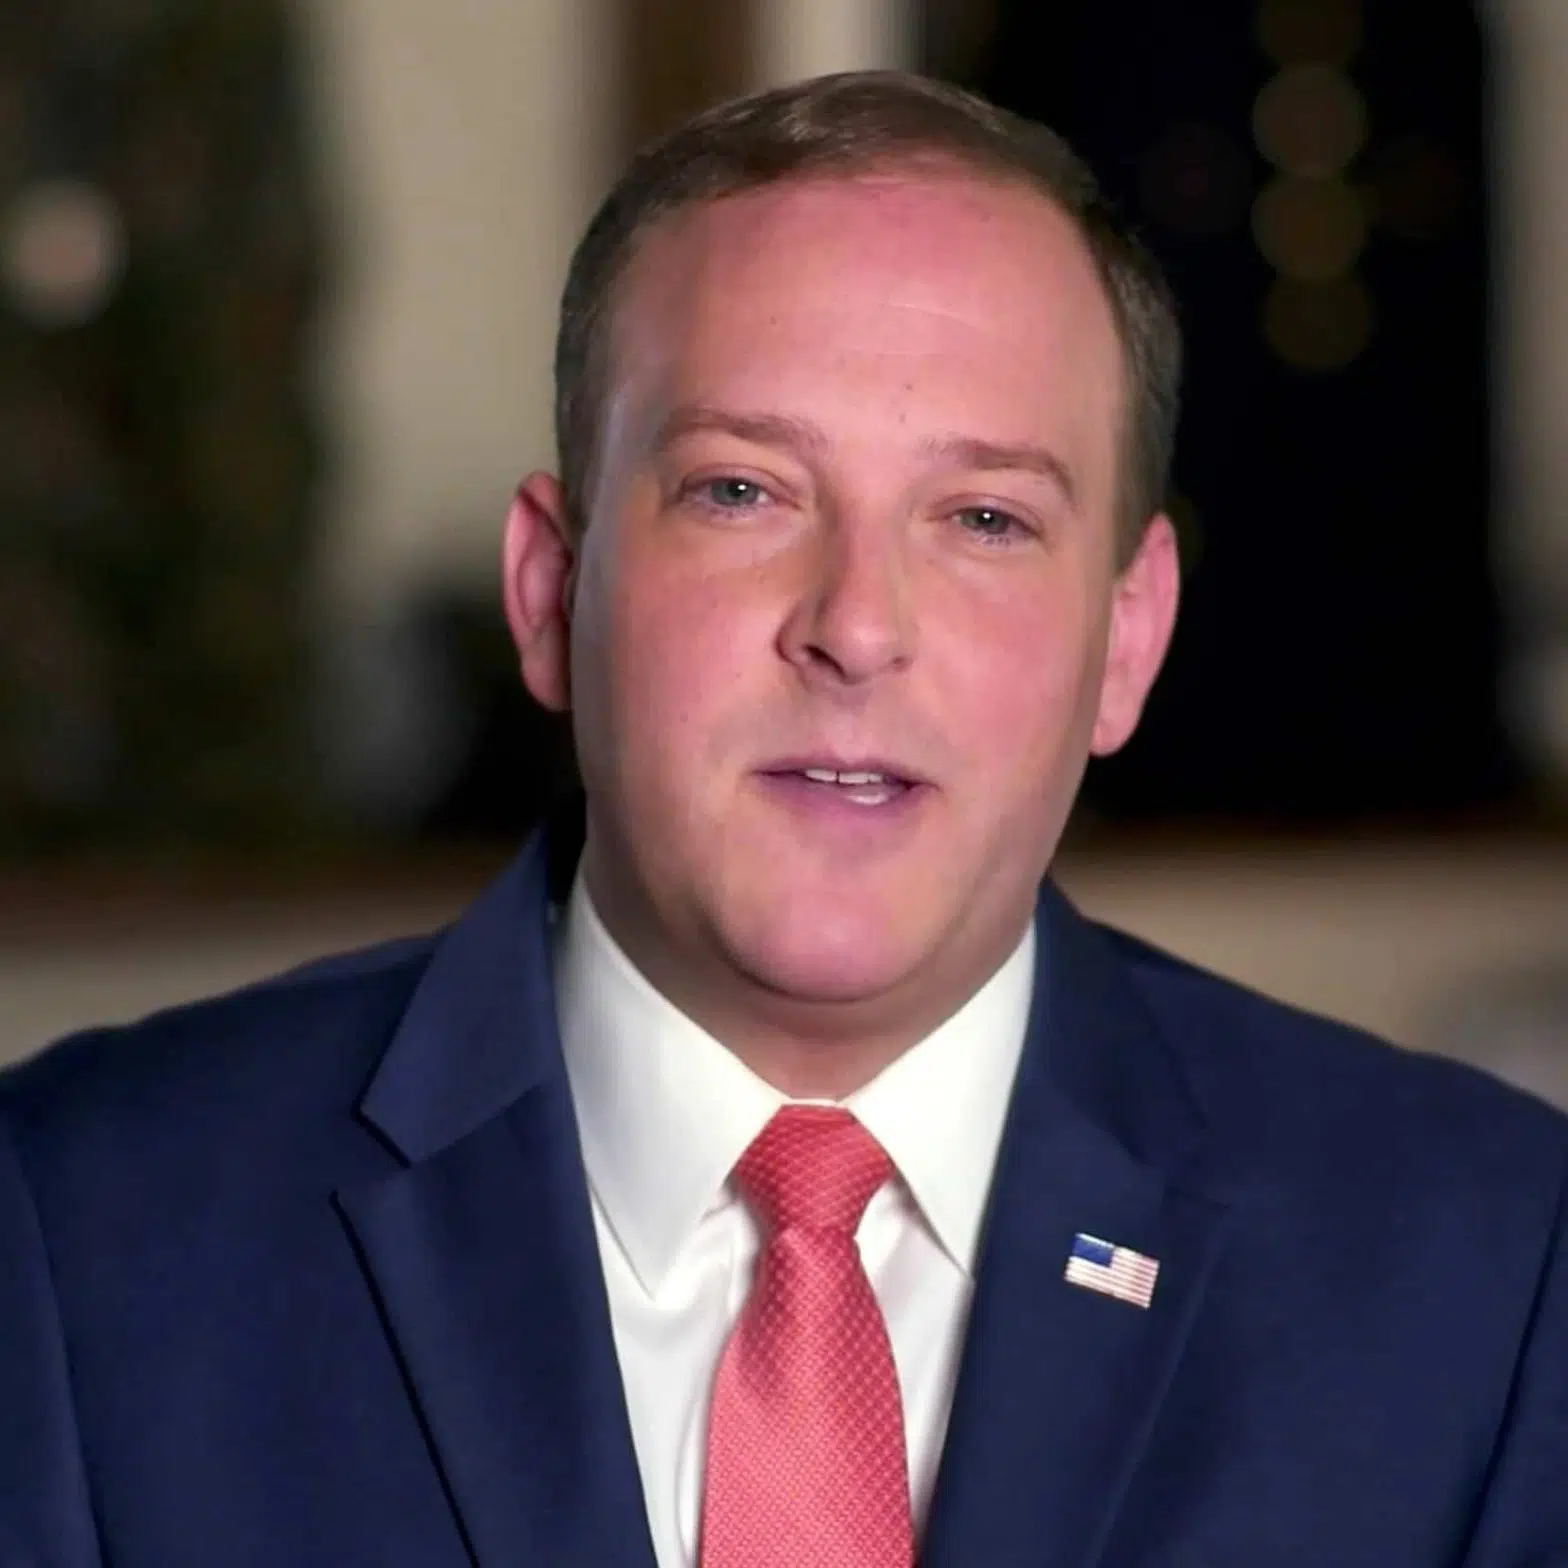 NY-01: Lee Zeldin (R) | The Well News | Pragmatic, Governance, Fiscally  Responsible, News & Analysis